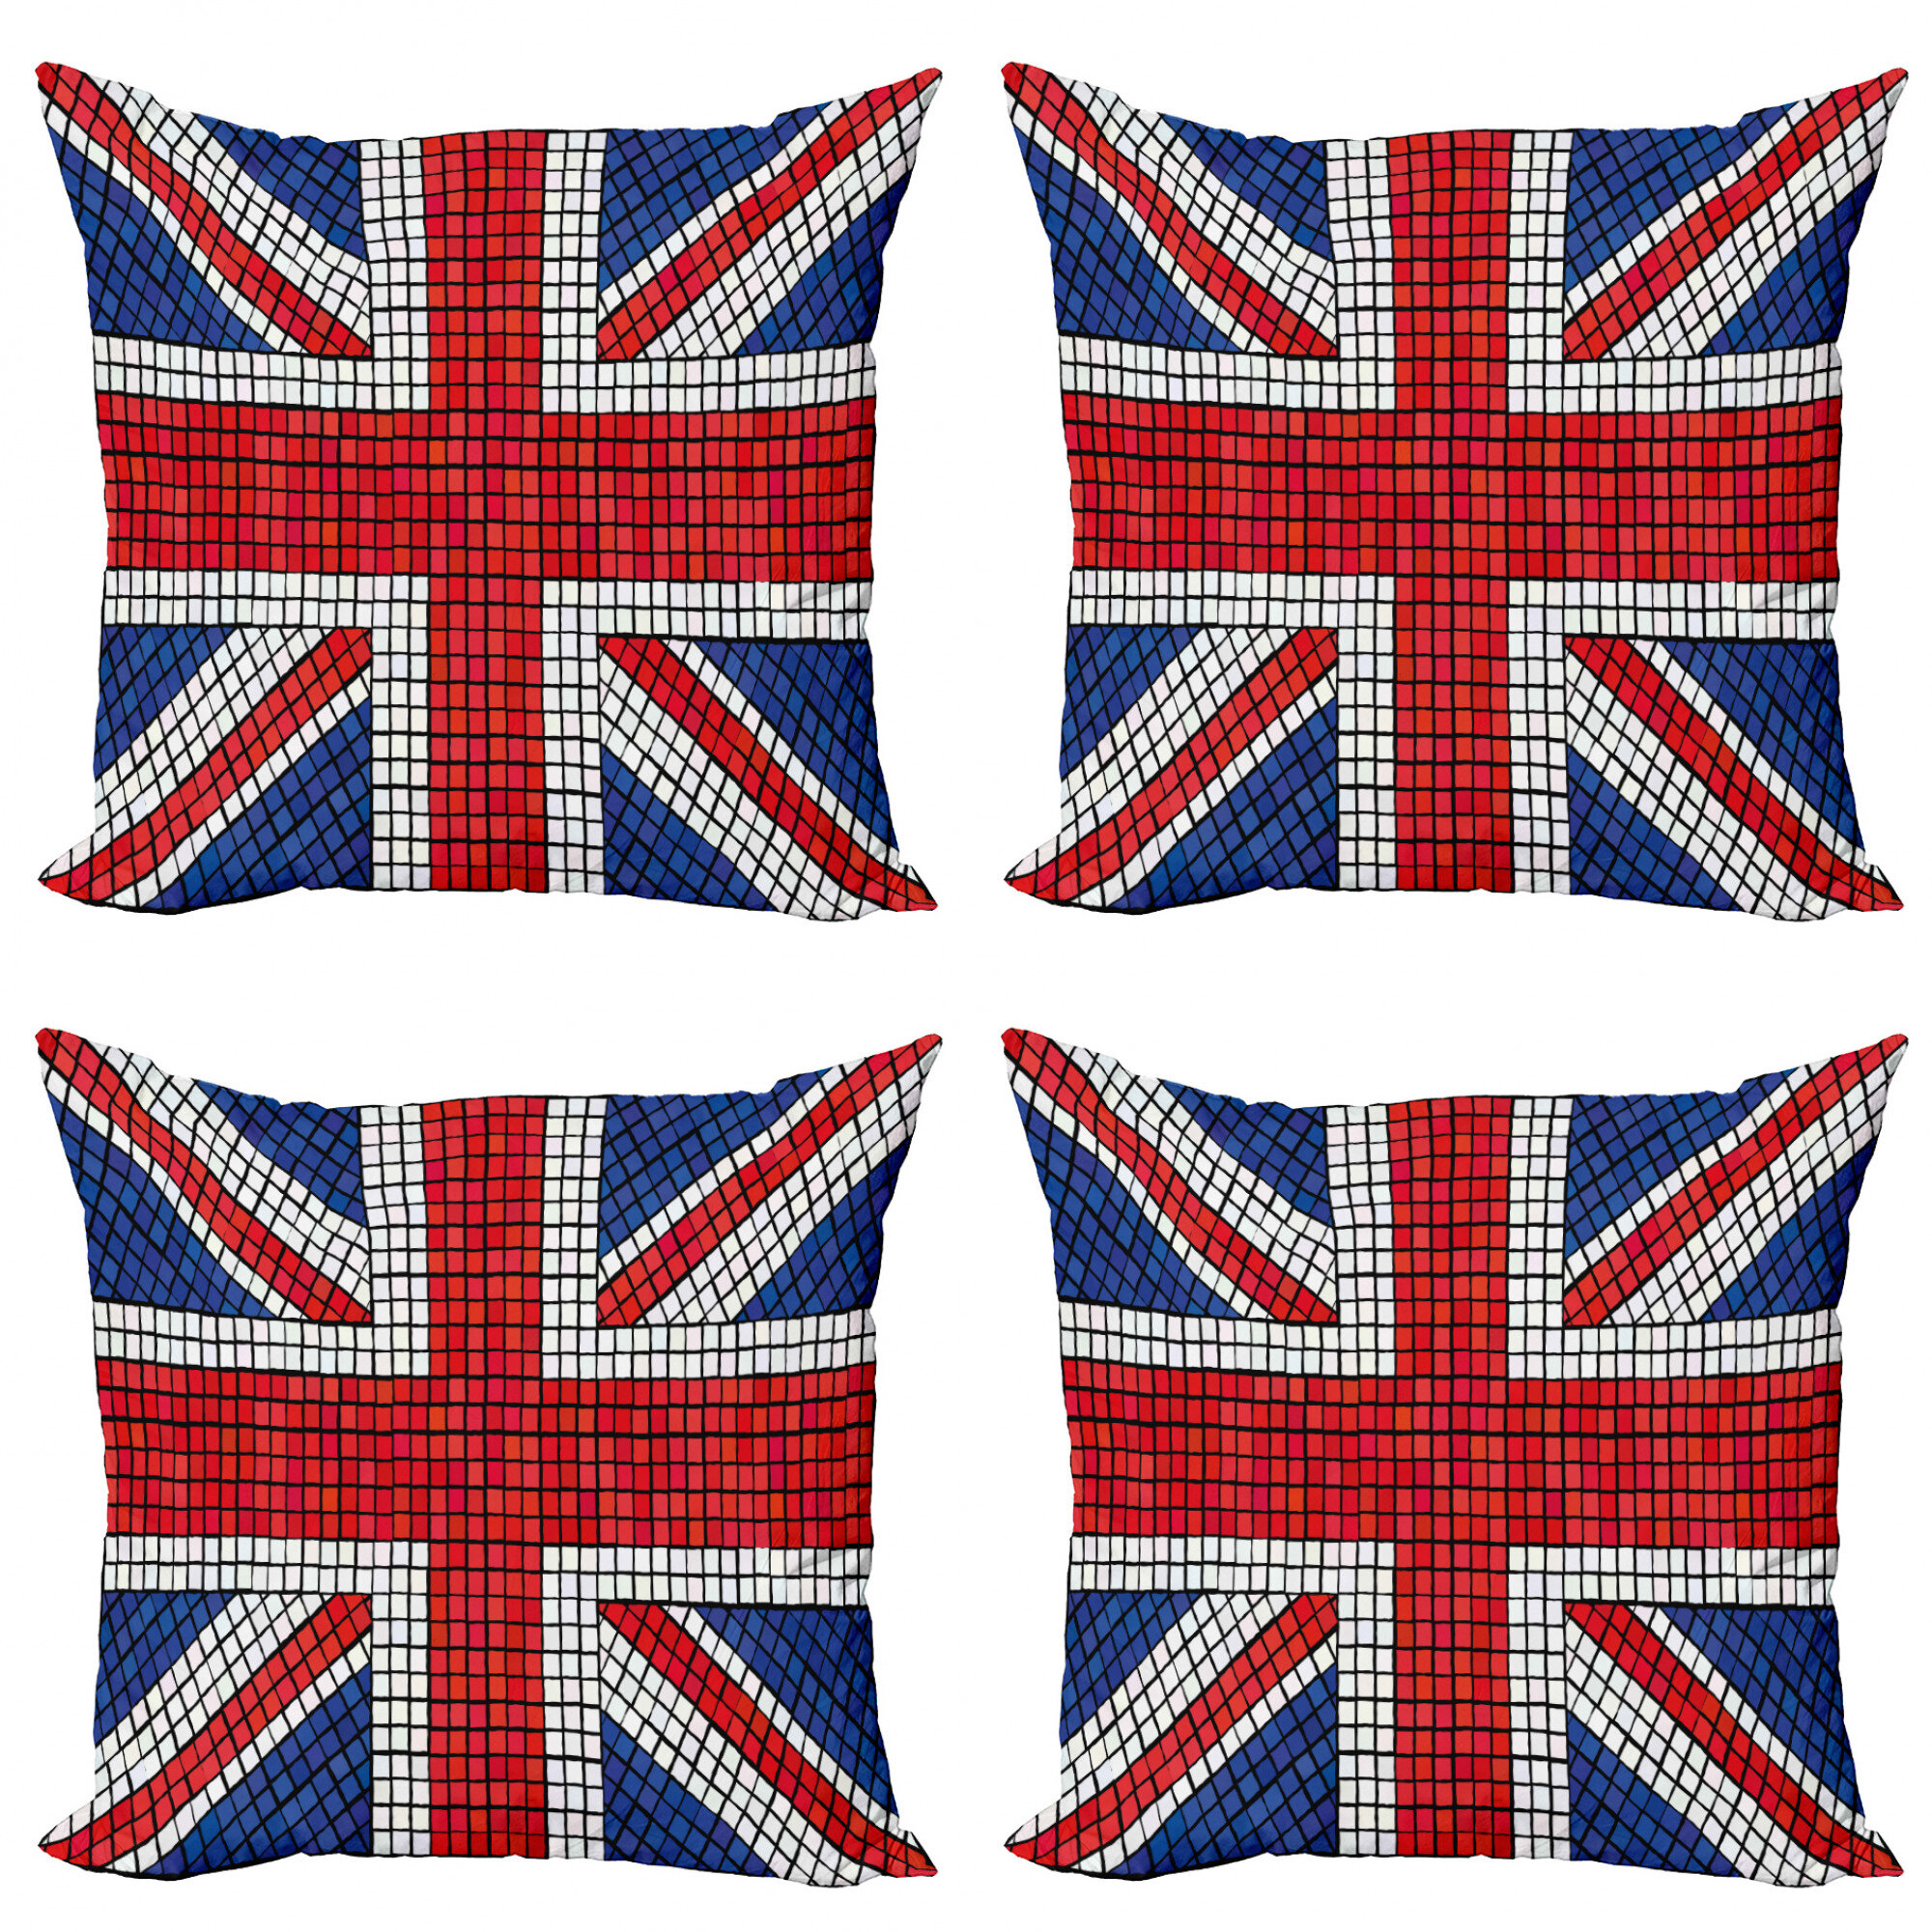 20 X 20 Ambesonne Union Jack Throw Pillow Cushion Cover Decorative Square Accent Pillow Case Navy Blue Grunge Industrial Themed Composition of UK and USA Flags Vintage Print